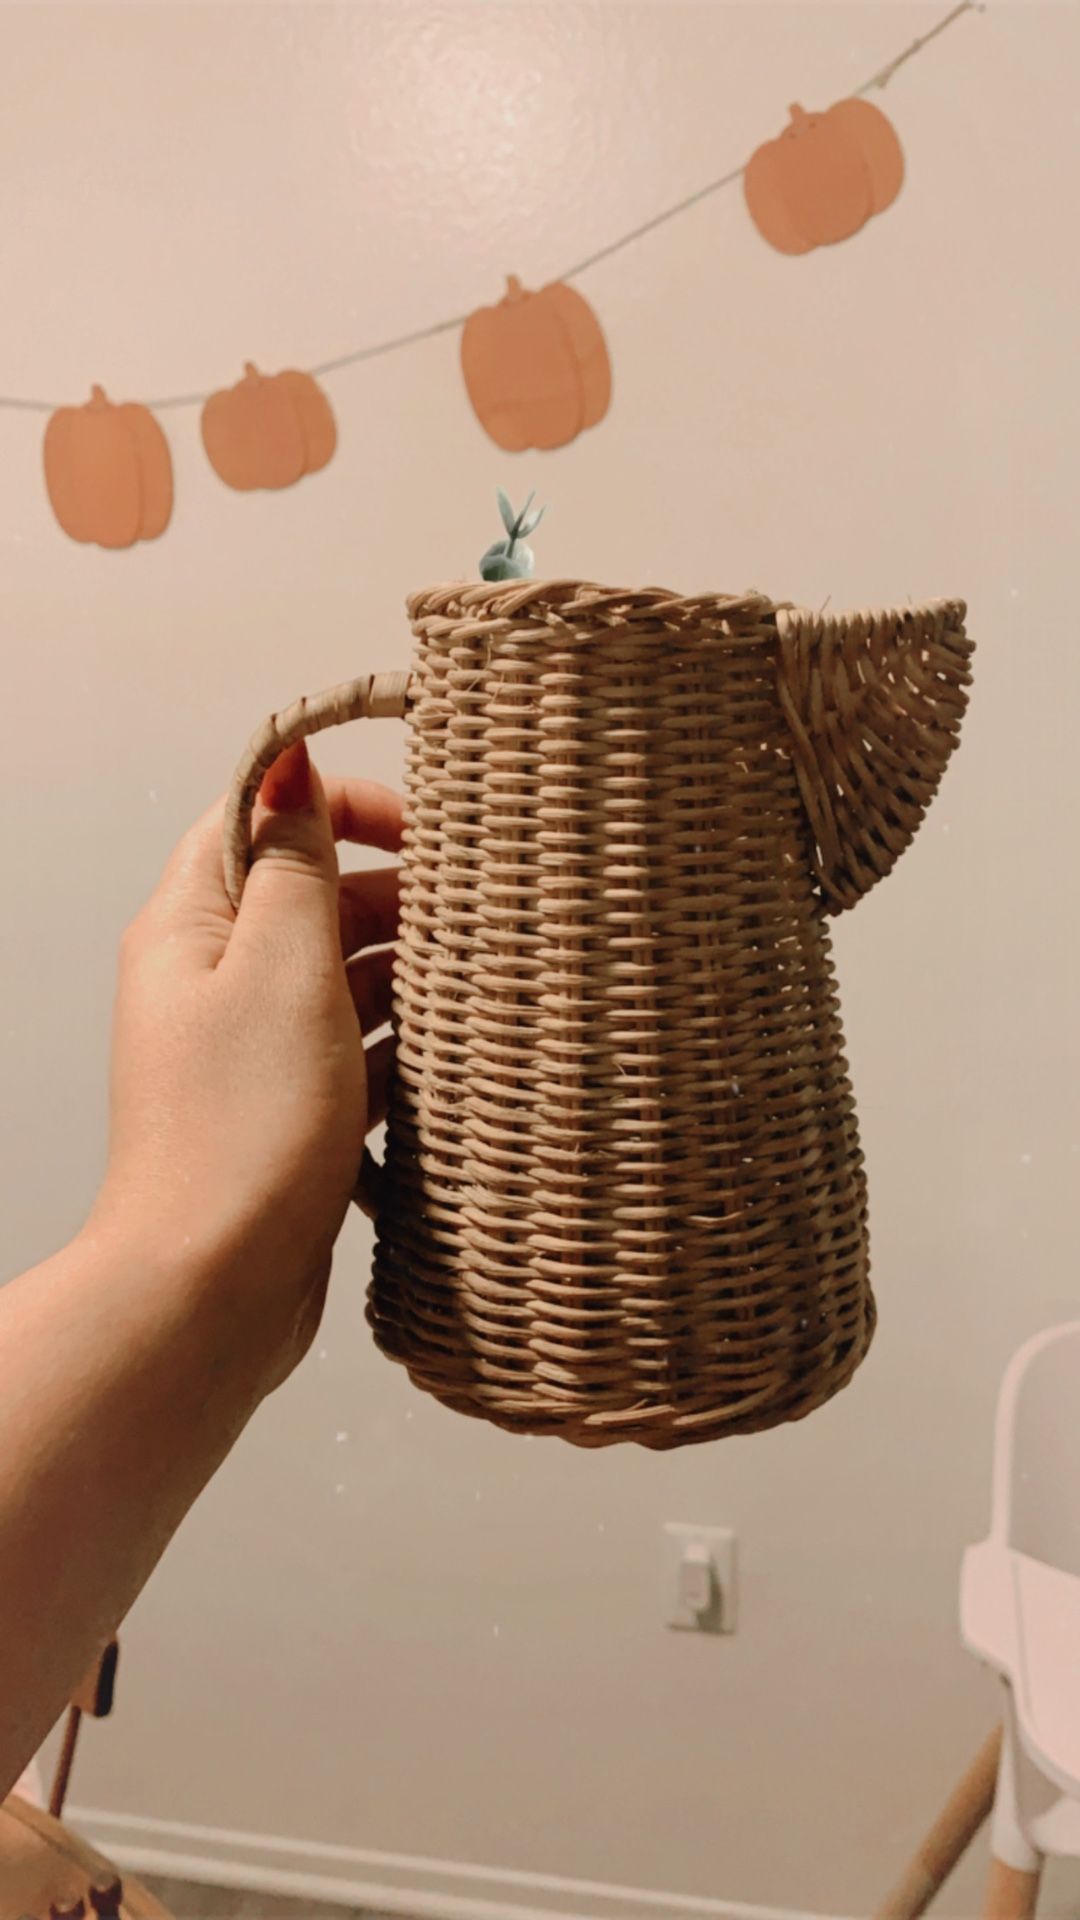 Wicker decor cup cute for plant inside or decor for kids kitchen